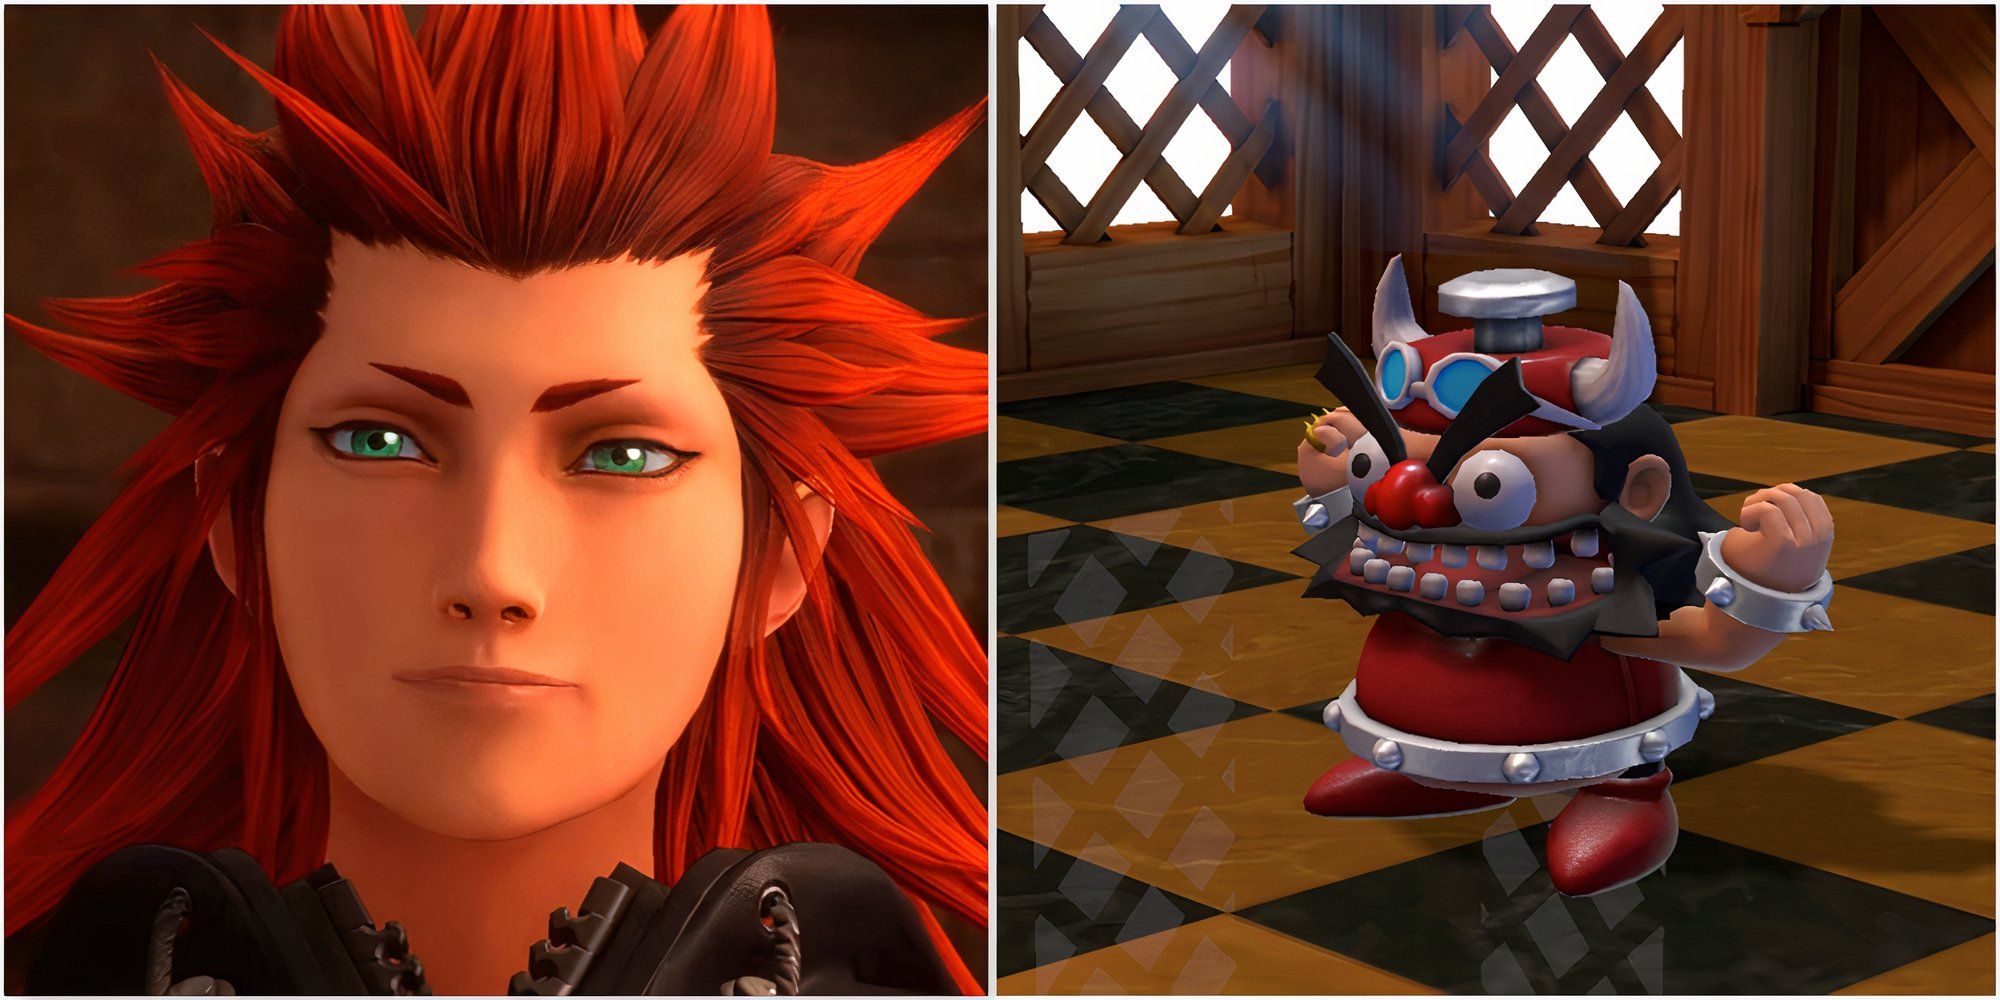 Axel from Kingdom Hearts 3 and Booster in Super Mario RPG